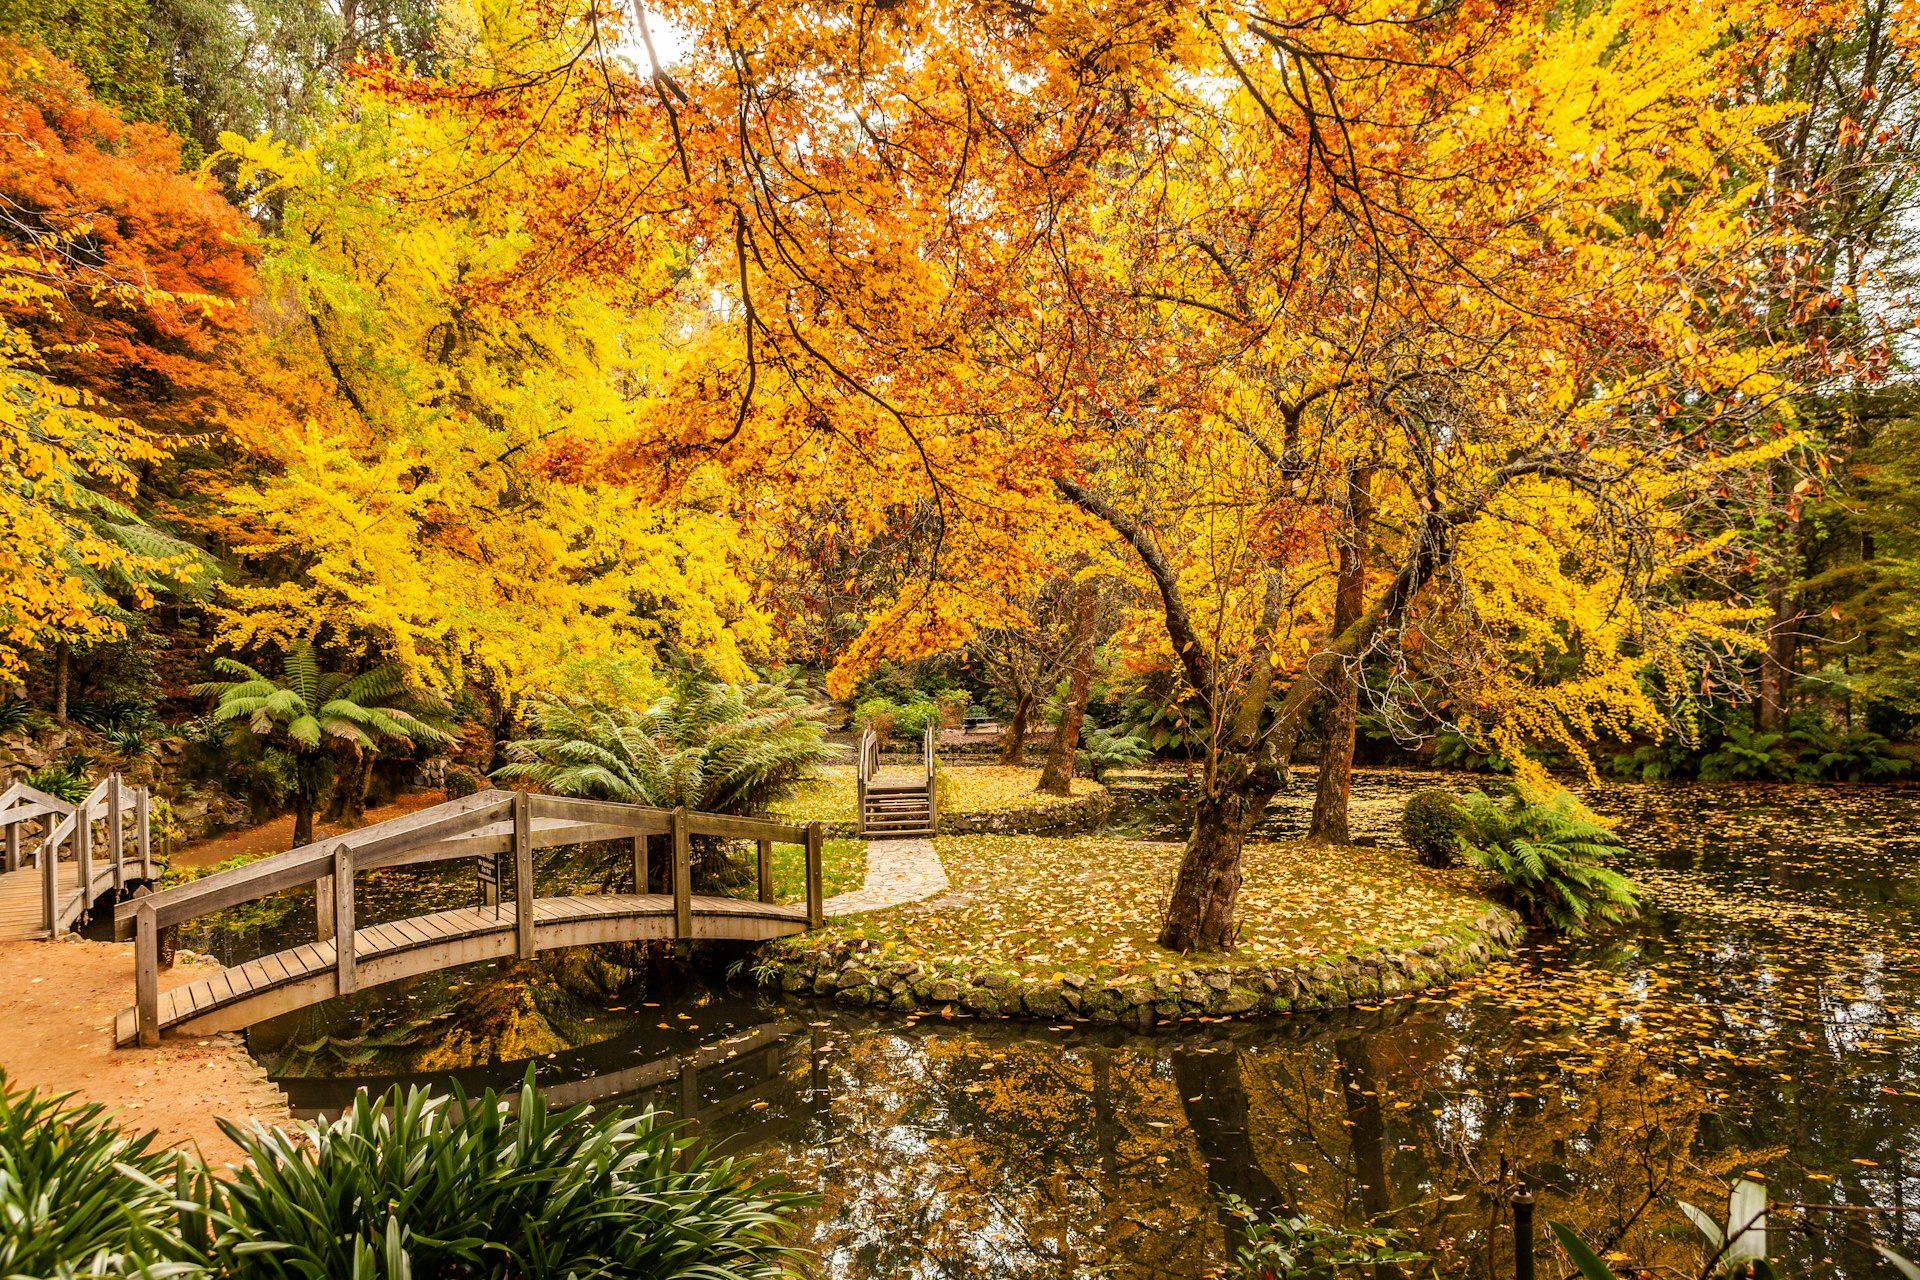 A small wooden bridge stretches over a pond to a small piece of land with a tree in full autumn color in Victoria, Australia. Orange leaves are all over the ground.